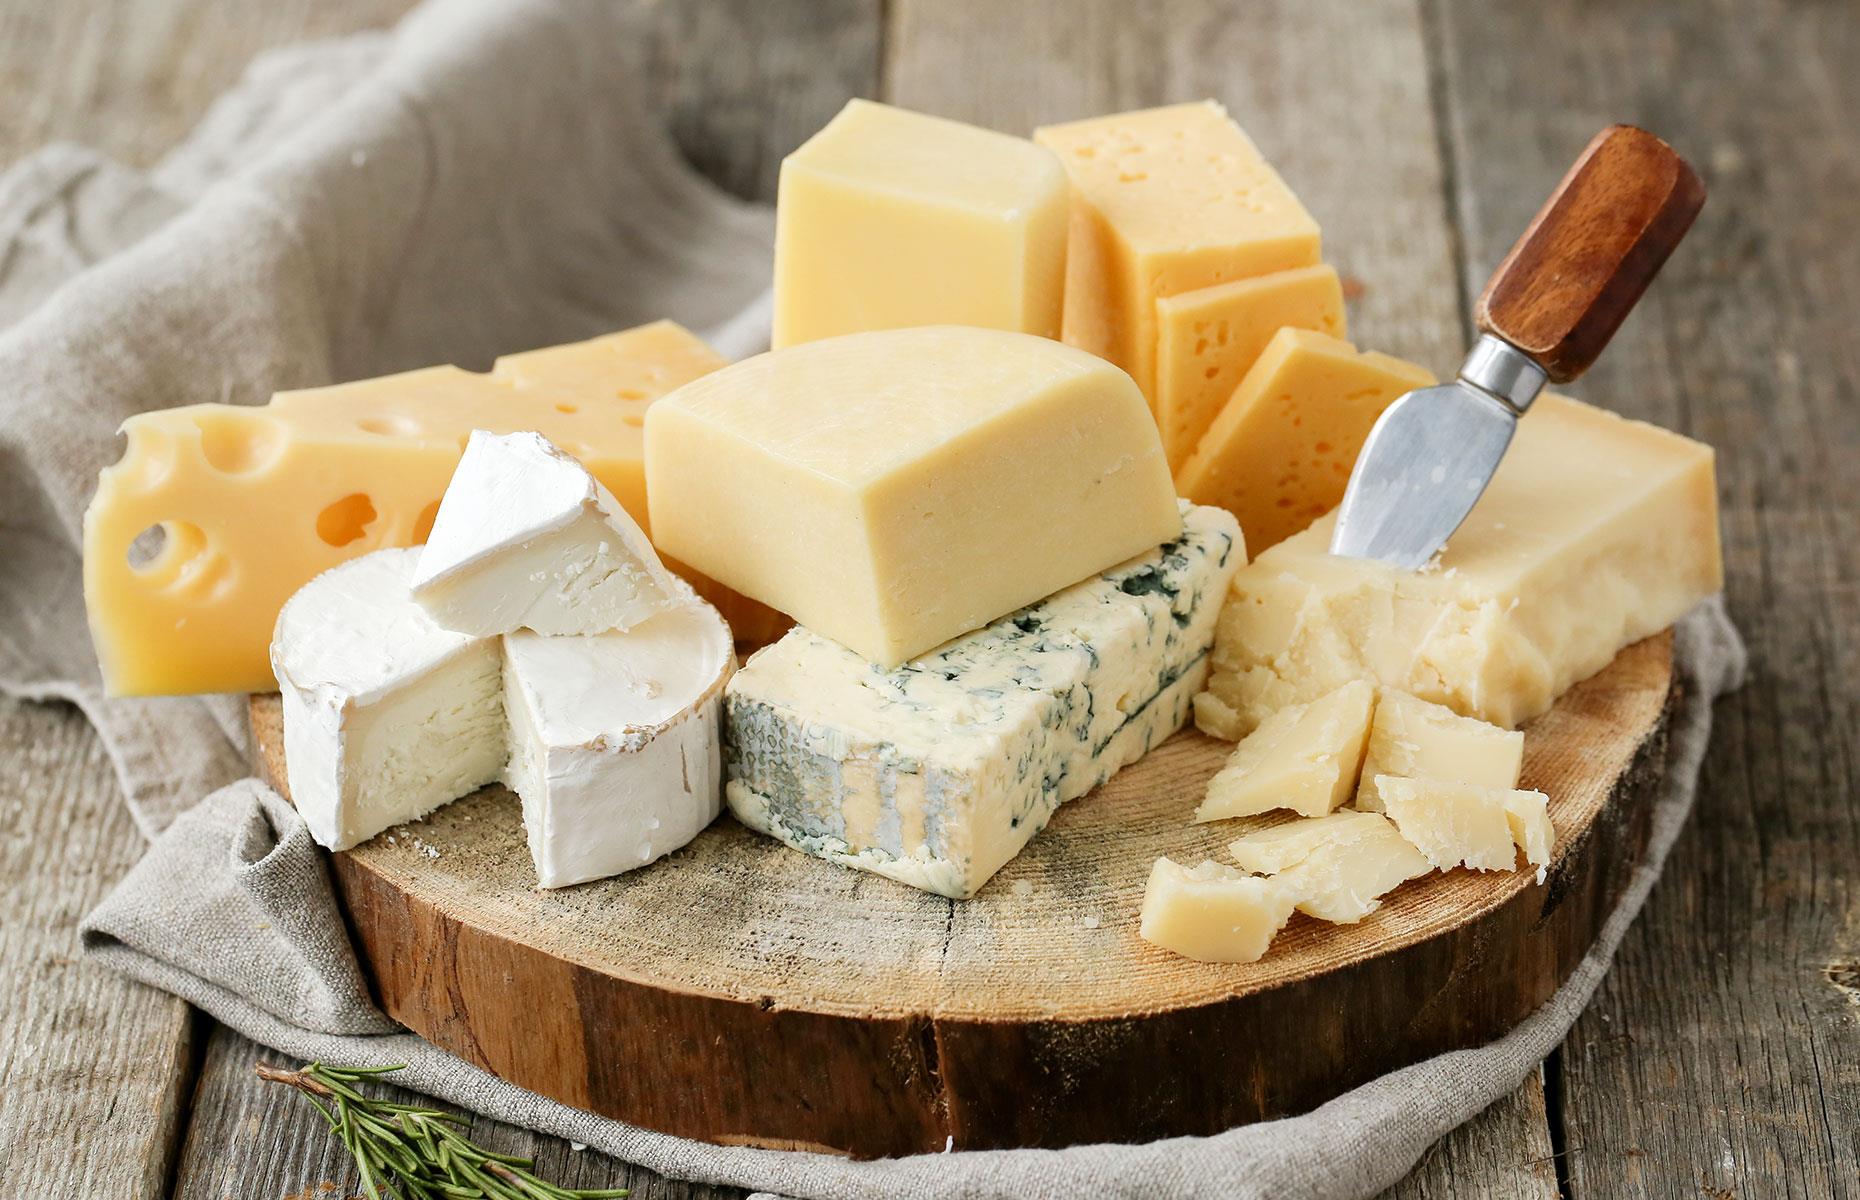 <p>It's brave to have a culinary argument with the French, but it's better for you to leave cheese until last rather than sandwich it between main course and dessert as French people often do. <a href="https://www.ncbi.nlm.nih.gov/pubmed/23649576">Research</a> shows chewing cheese reduces acidity in the mouth (which can be high after a sugary dessert), in turn reducing your chances of tooth decay.</p>